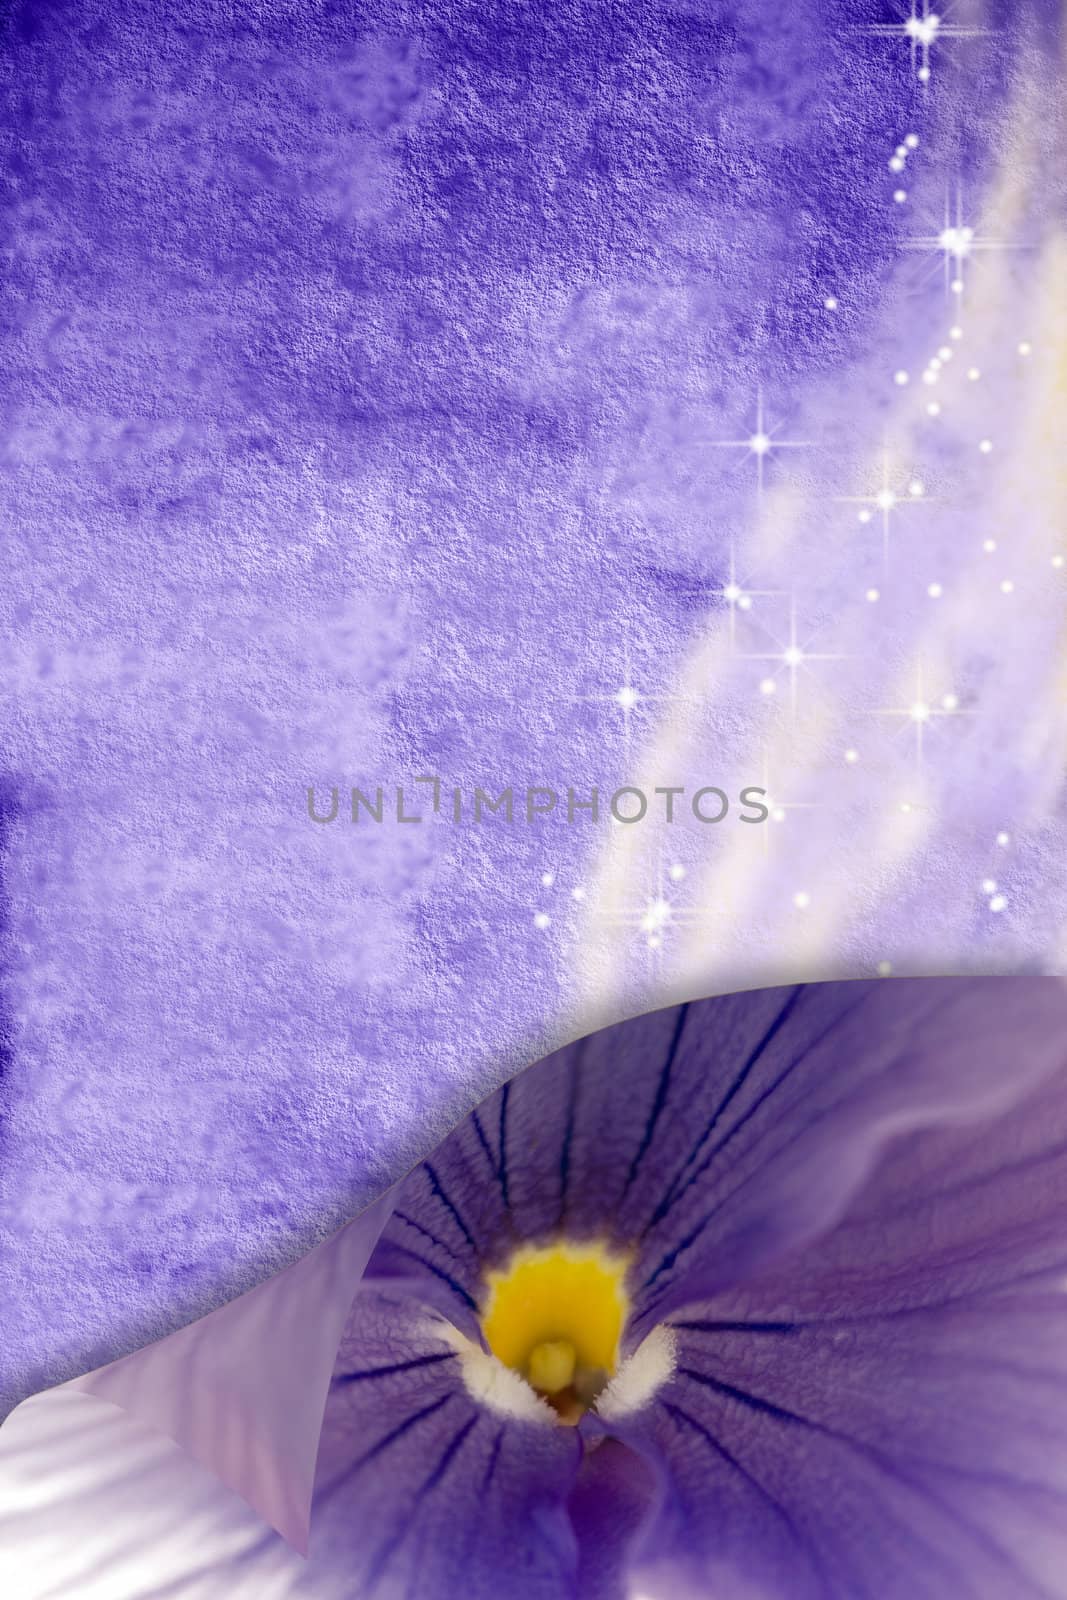 Romantic background stars and flowers  by Carche